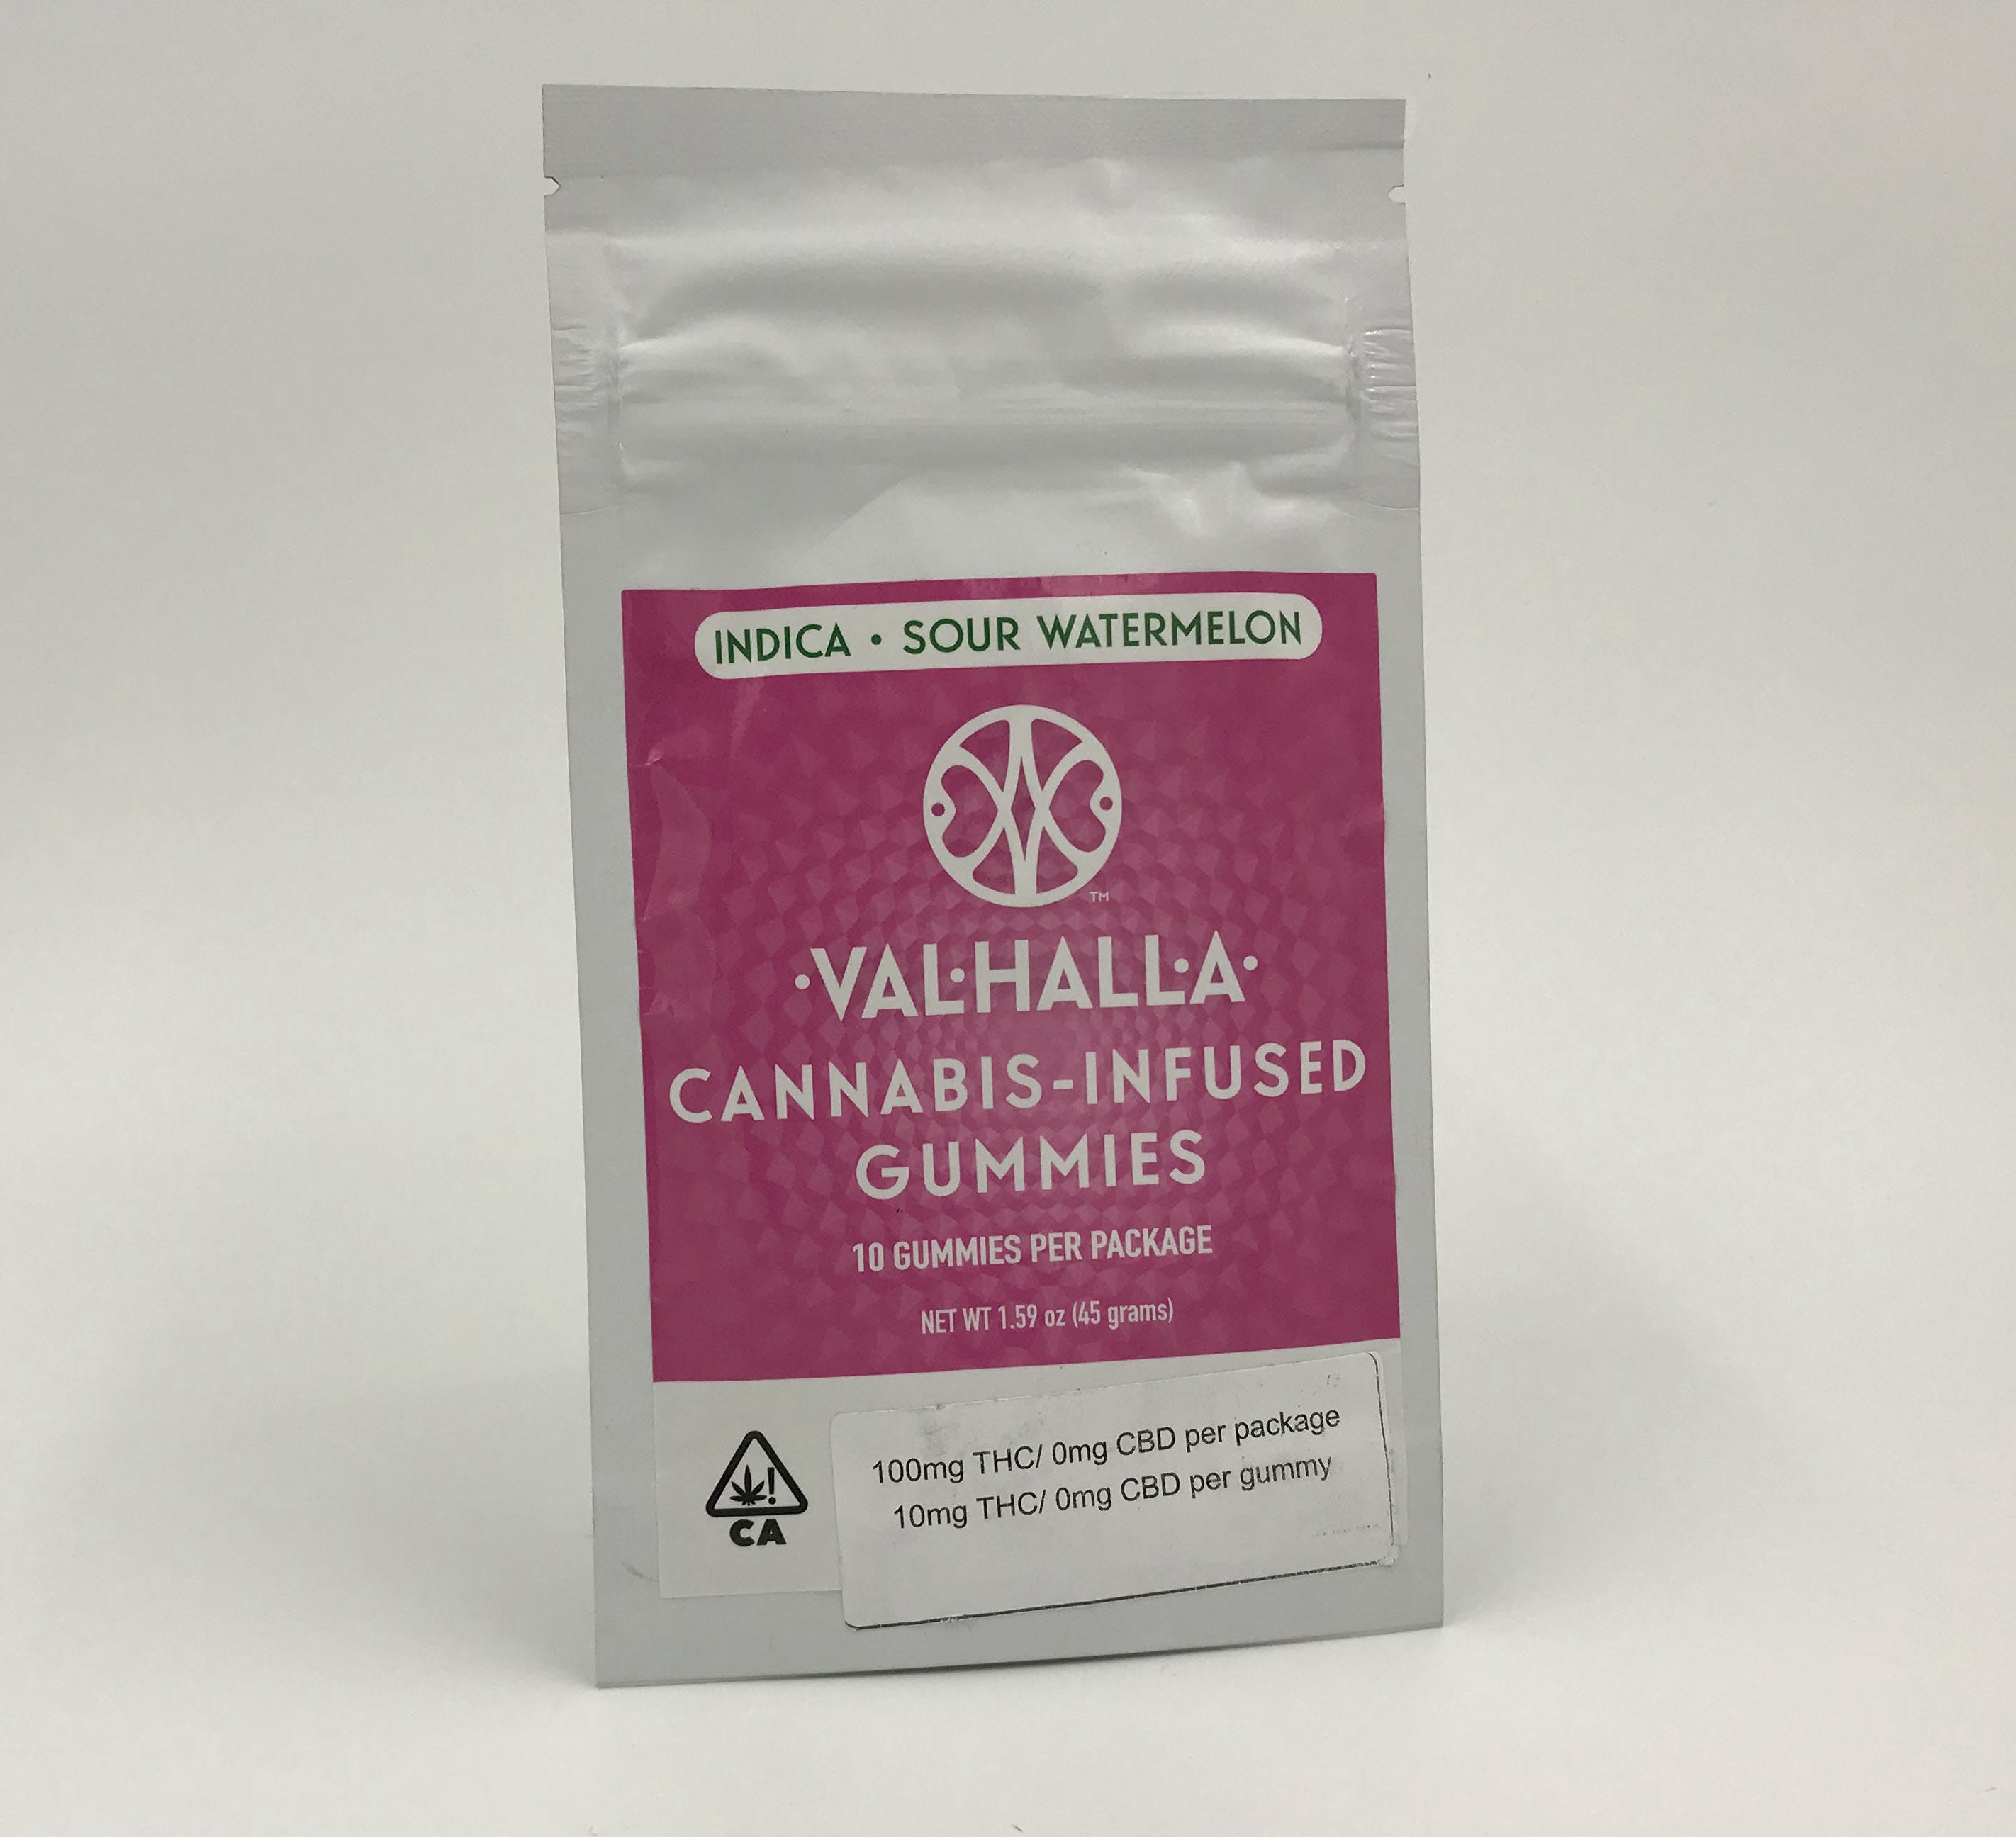 edible-sour-watermelon-100mg-thc-gummy-by-valhalla